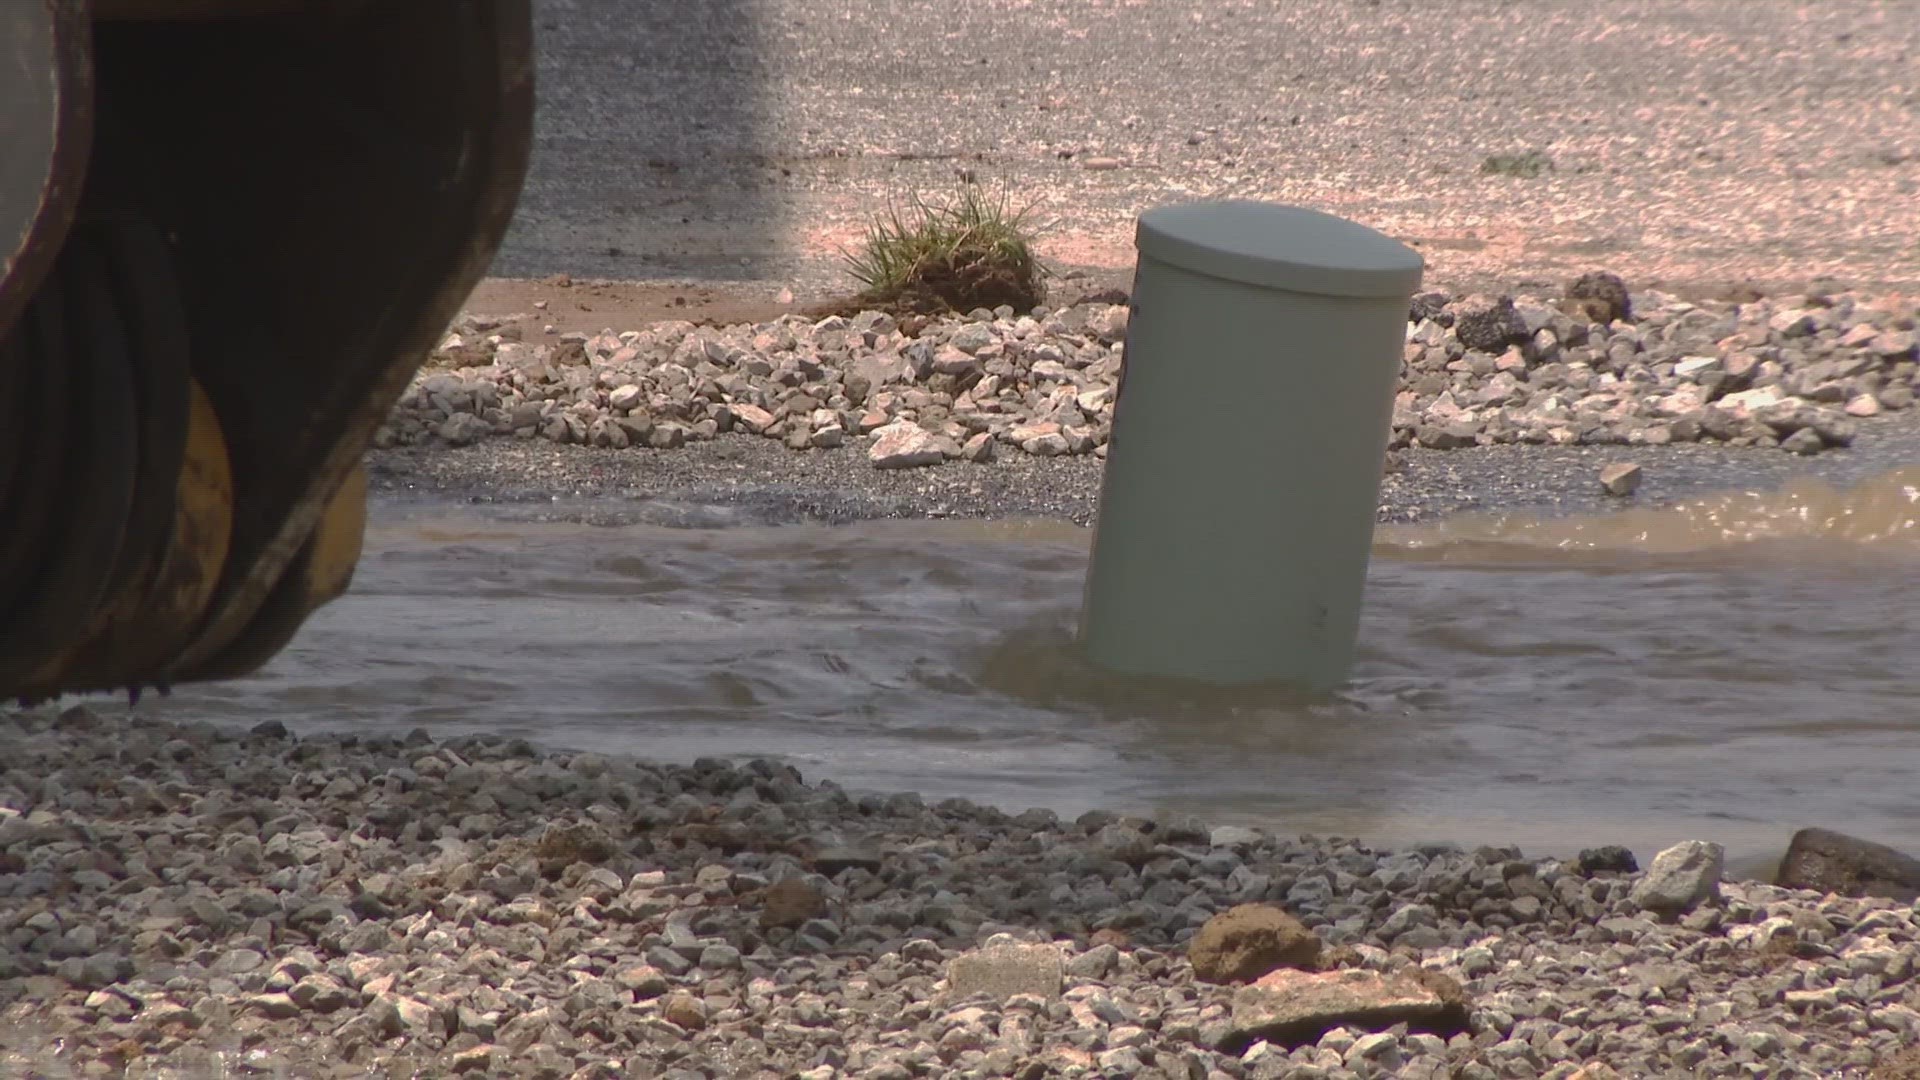 The city blames crumbling infrastructure on 16 recent water main breaks in south St. Louis. It's using the main breaks to push for a water rate hike.